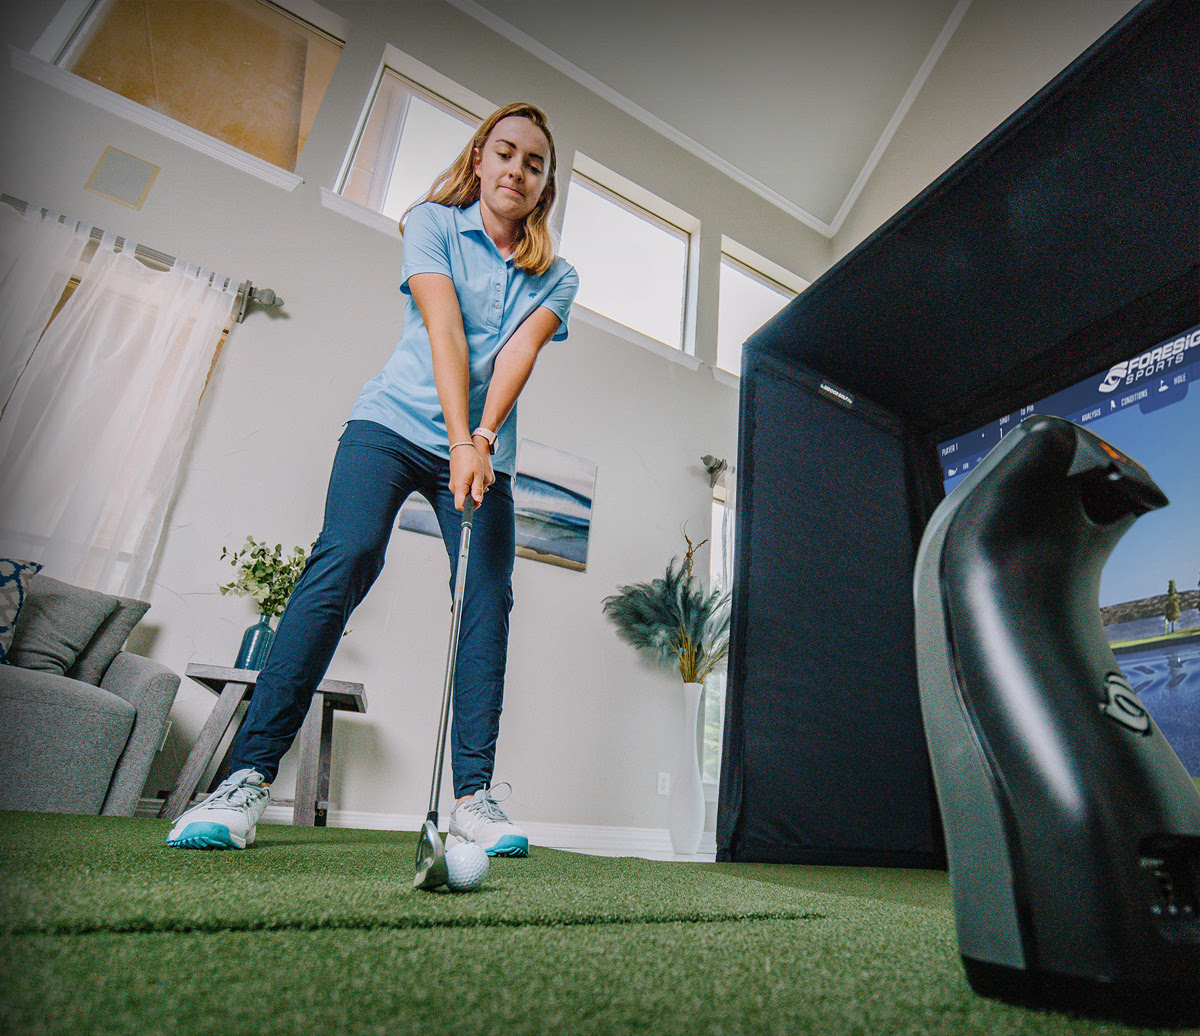 Which is The Best Future Technology for Indoor Golf Simulator Training?